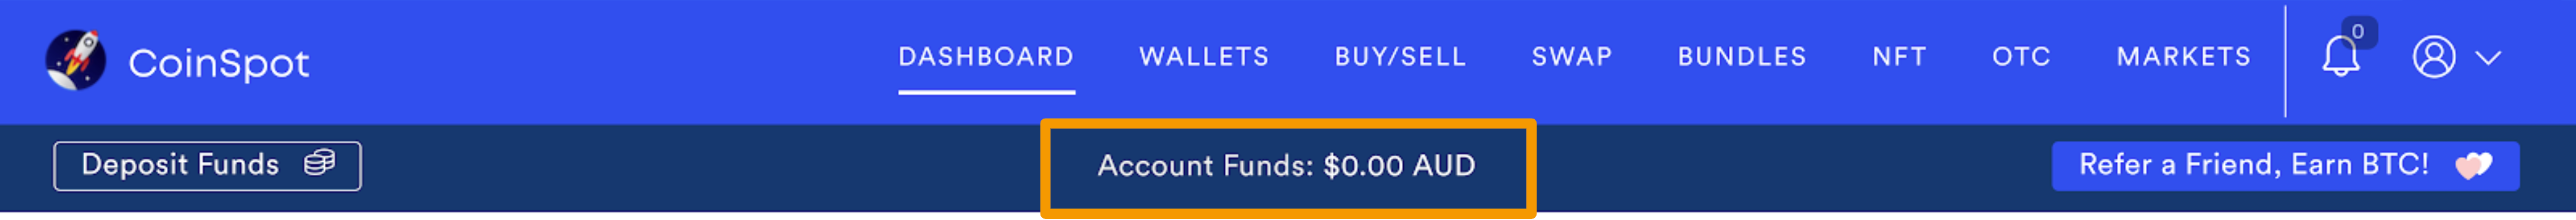 CoinSpot - Account Funds.png